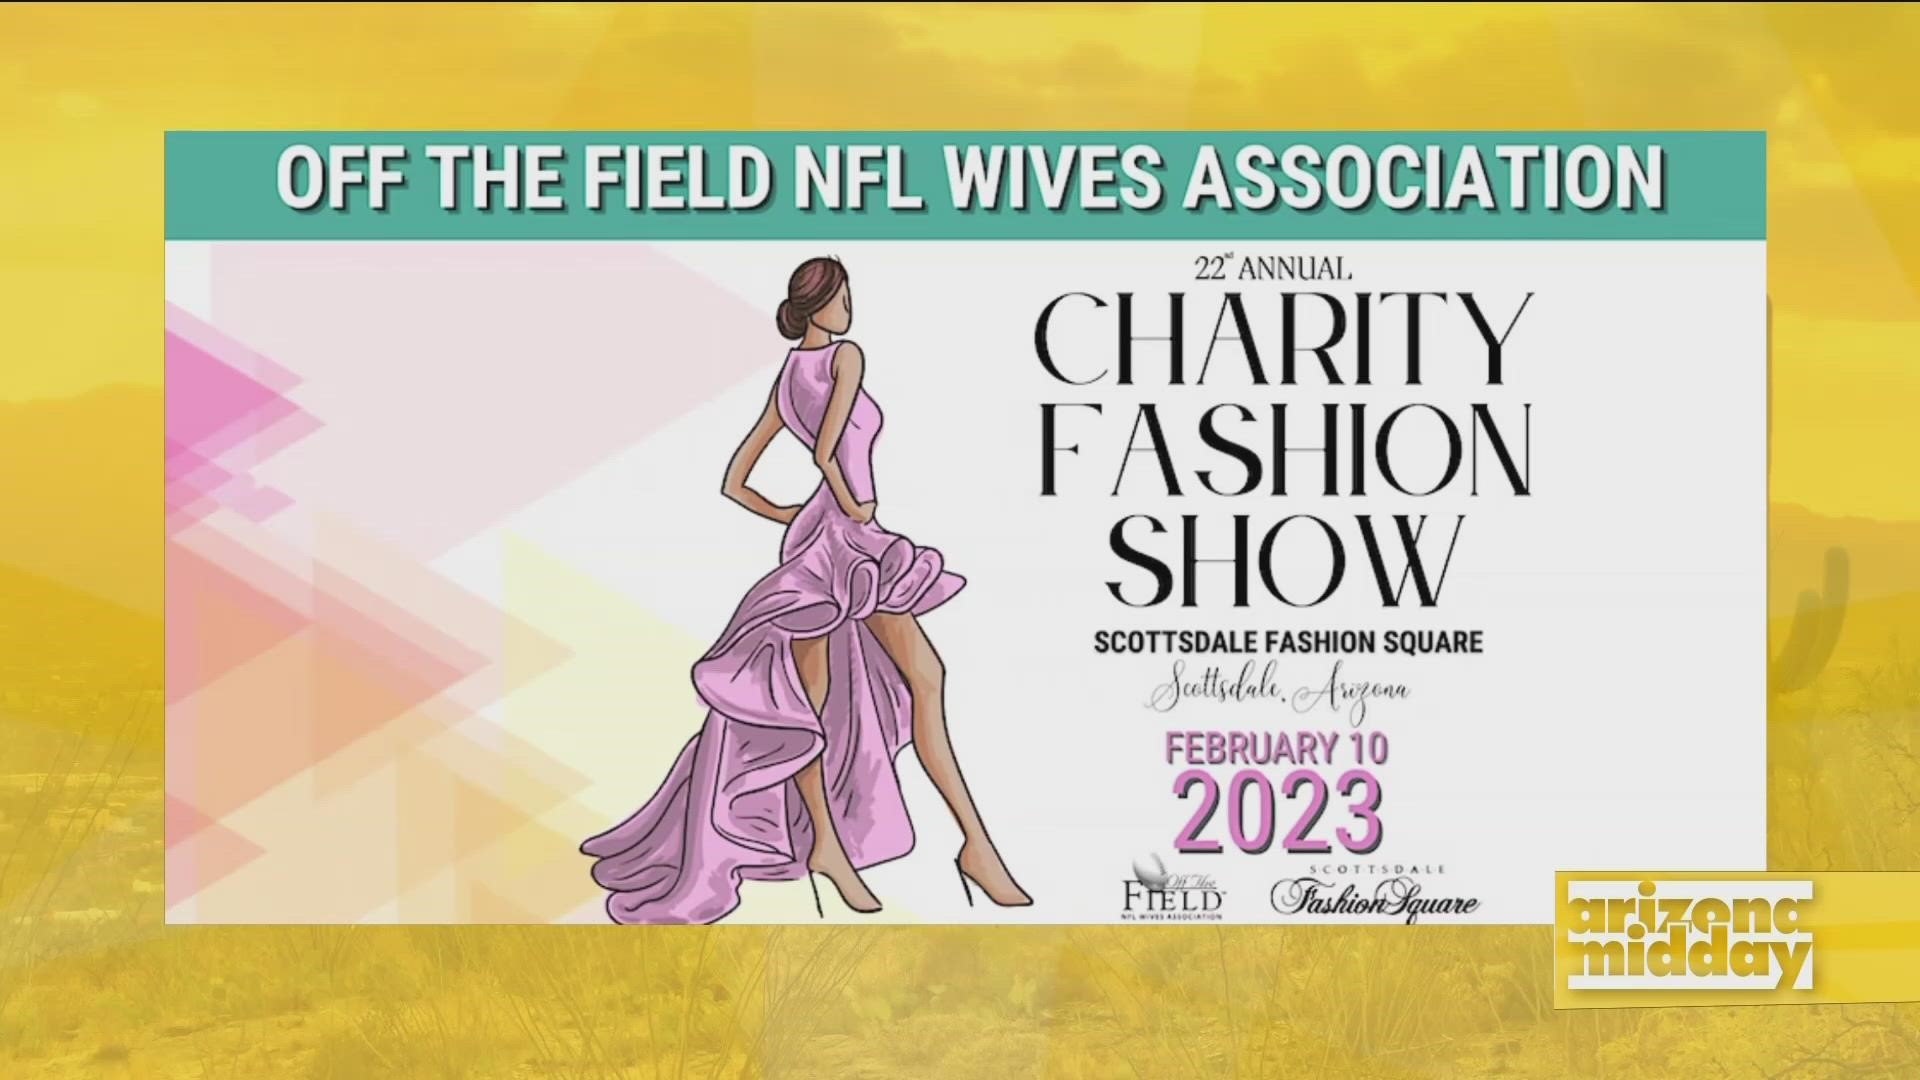 Off The Field NFL Wives Association is hosting the 22nd Annual Super Bowl Charity Fashion Show in Scottsdale which supports local nonprofits.